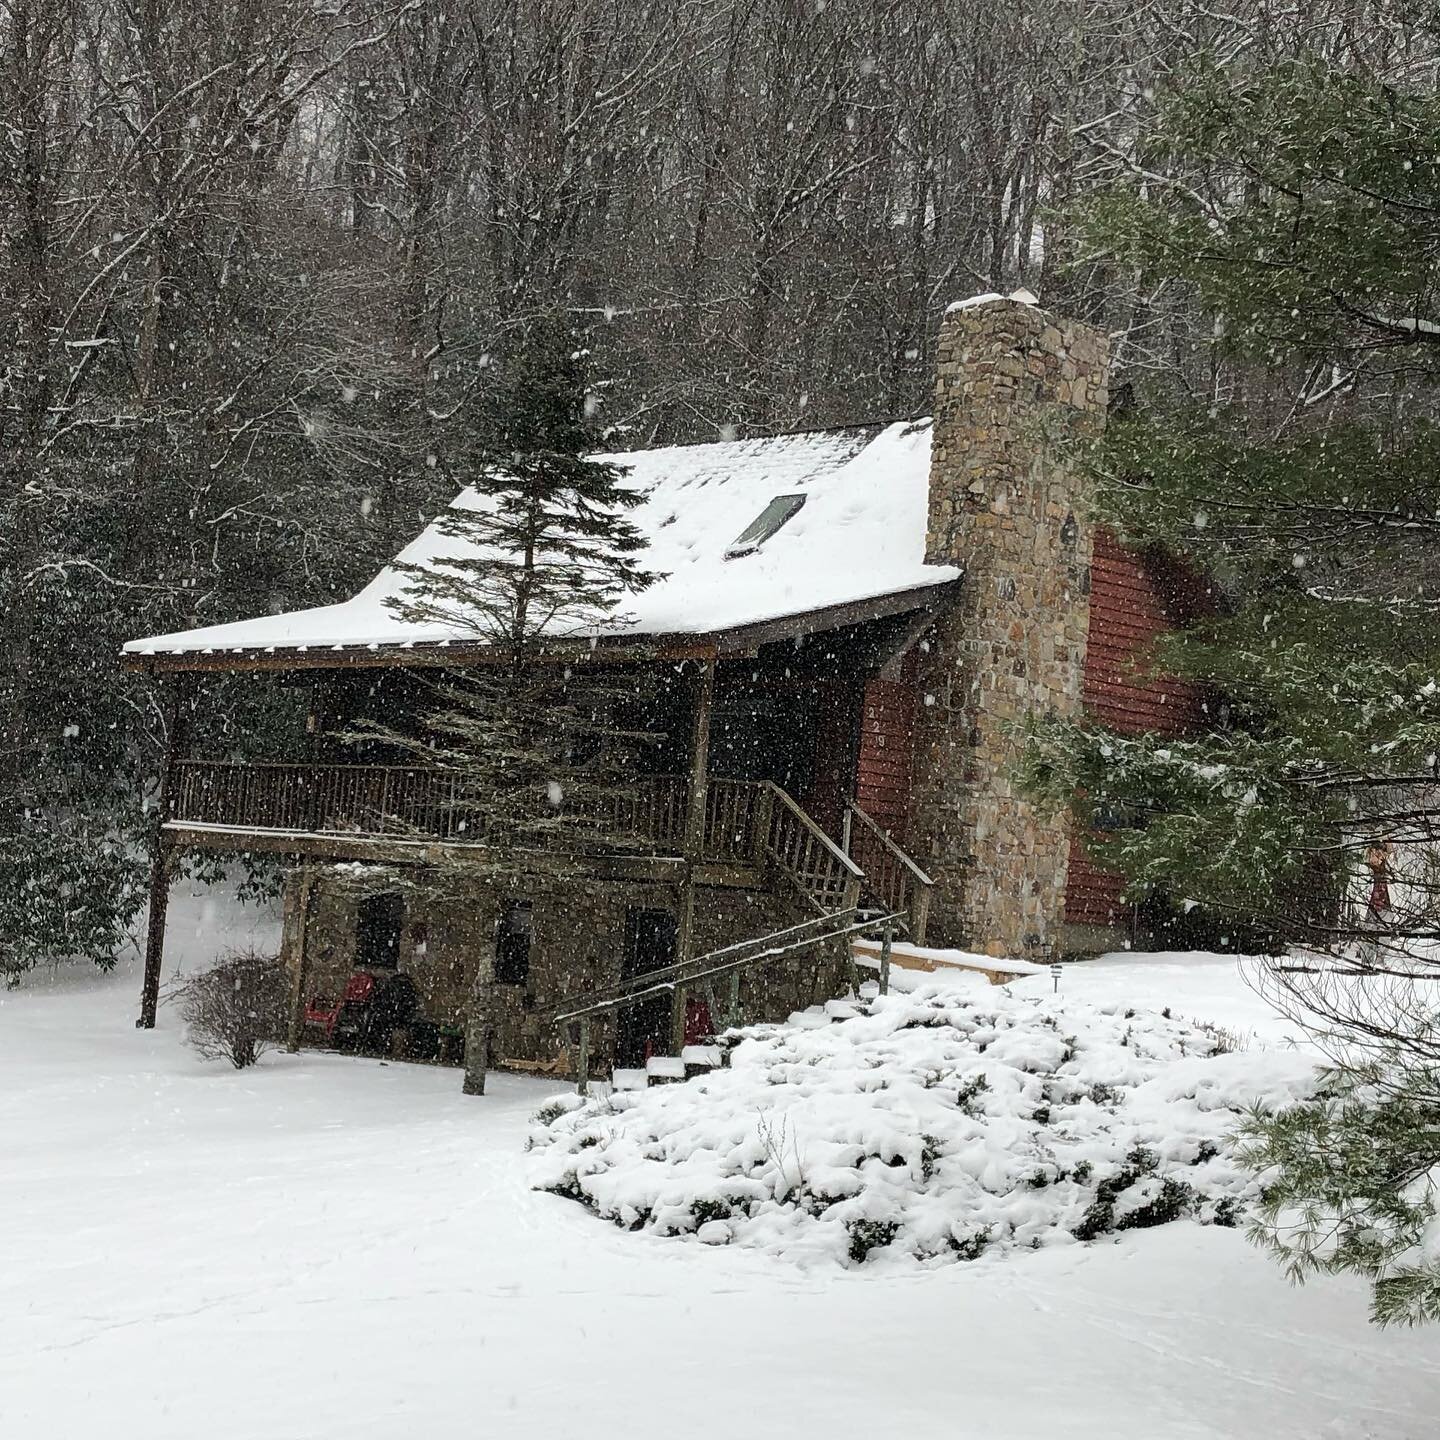 Winter scene at the Blowing Rock Cabin! Got about six inches of snow a week or so ago. Such a nice treat!